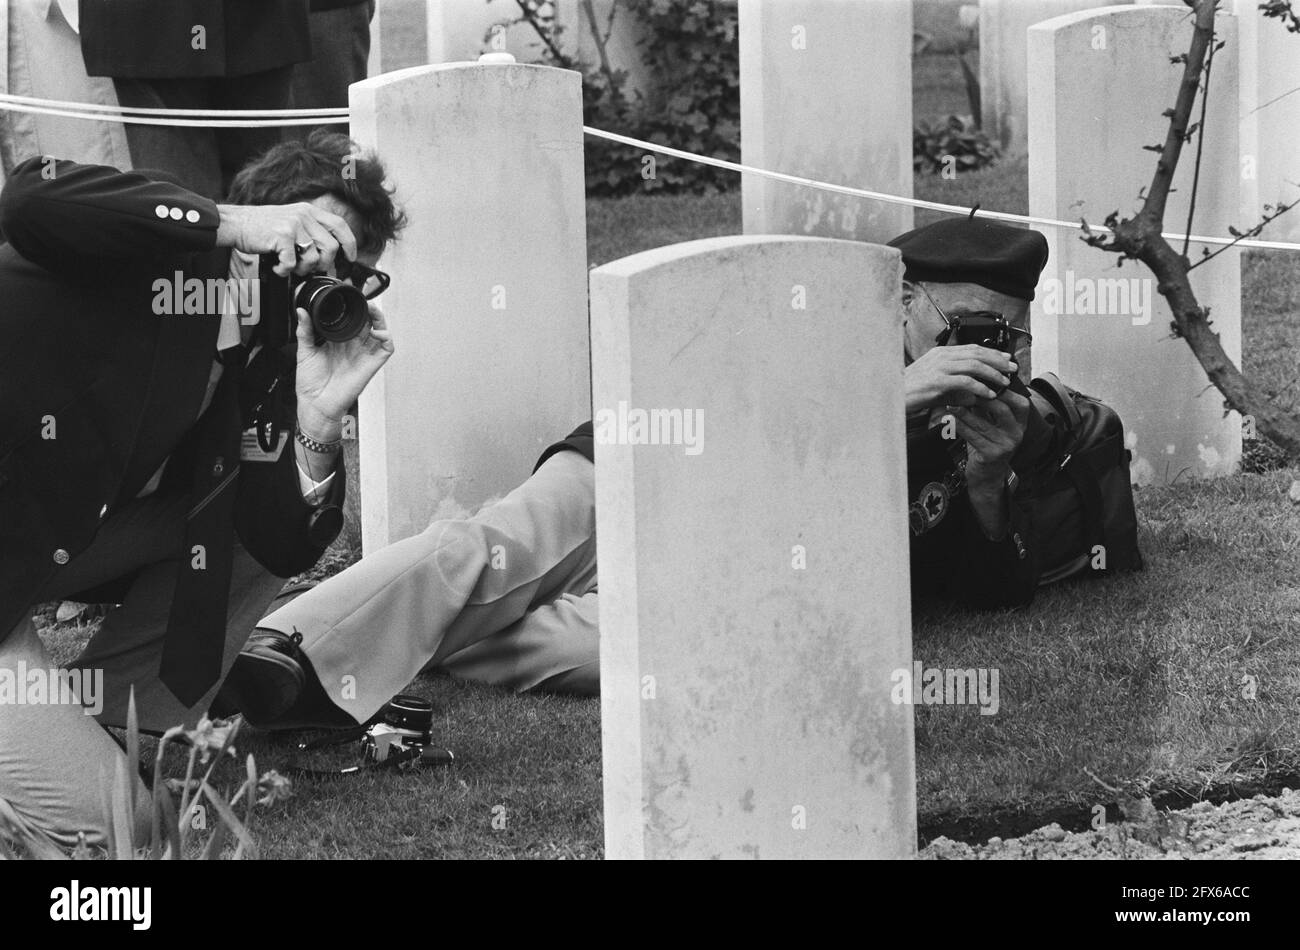 Memorial service at Canadian War Cemetery in Groesbeek in honor of Princess Margriet, veterans photographing the graves, May 7, 1985, honorary cemeteries, veterans, The Netherlands, 20th century press agency photo, news to remember, documentary, historic photography 1945-1990, visual stories, human history of the Twentieth Century, capturing moments in time Stock Photo